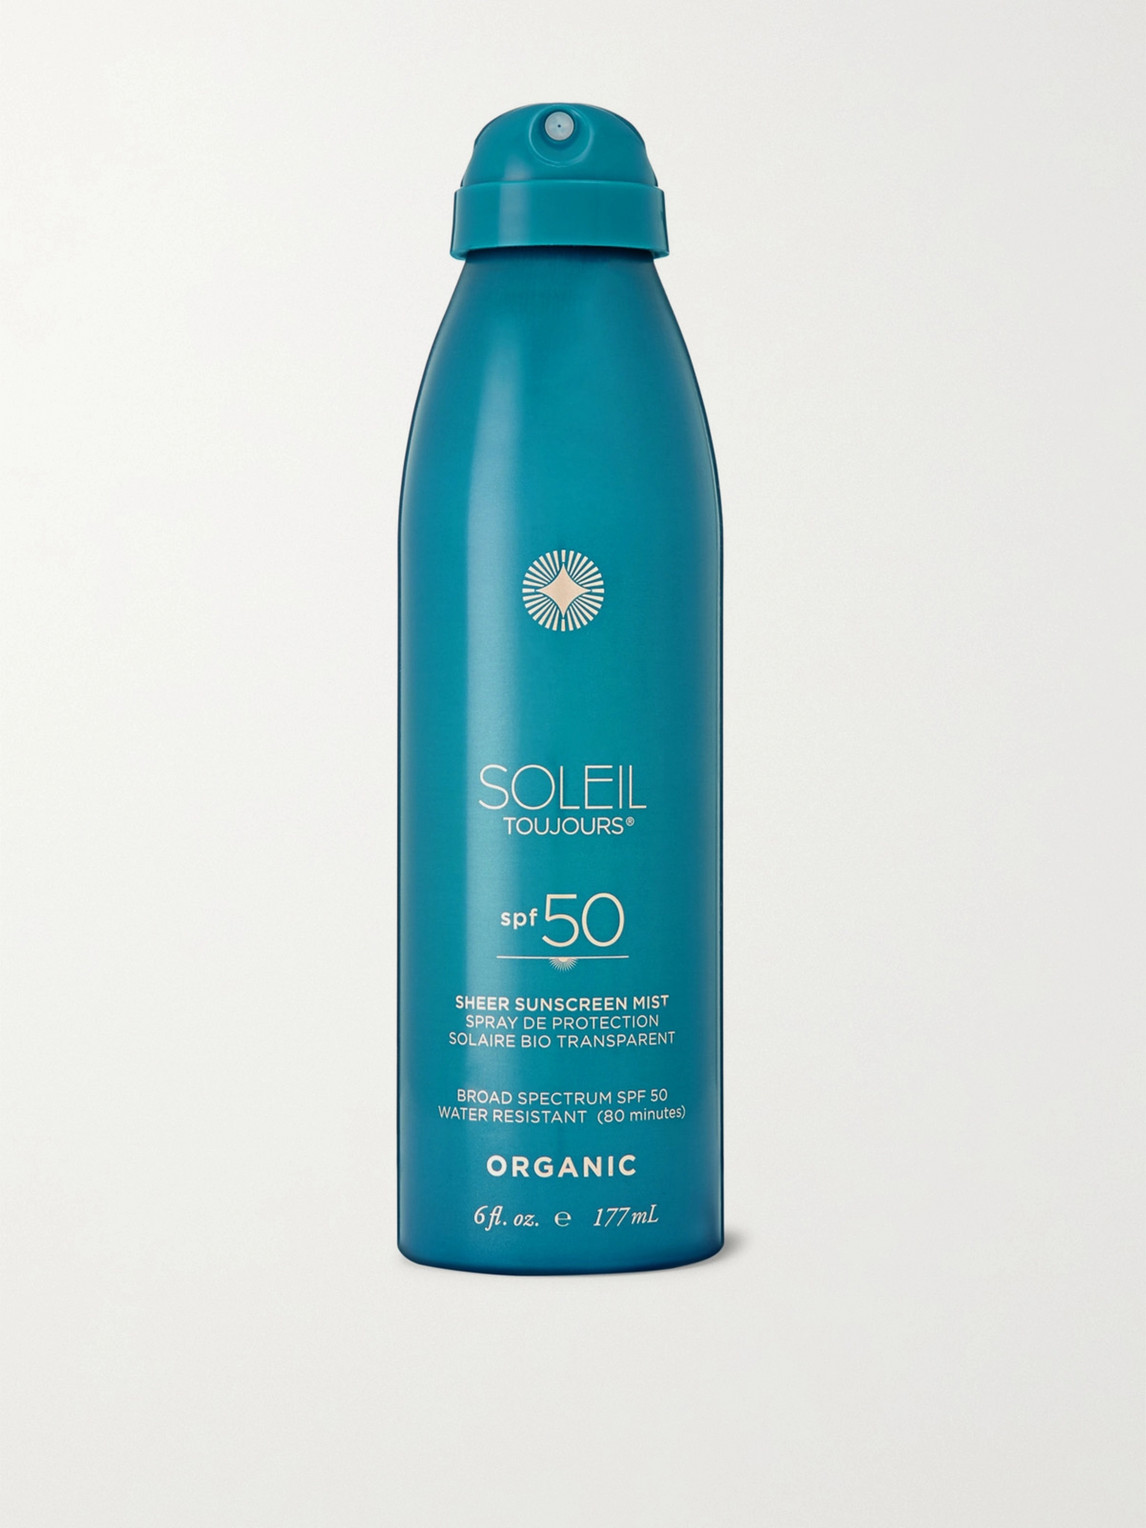 Soleil Toujours Organic Sheer Sunscreen Mist Spf50, 177ml In Colorless